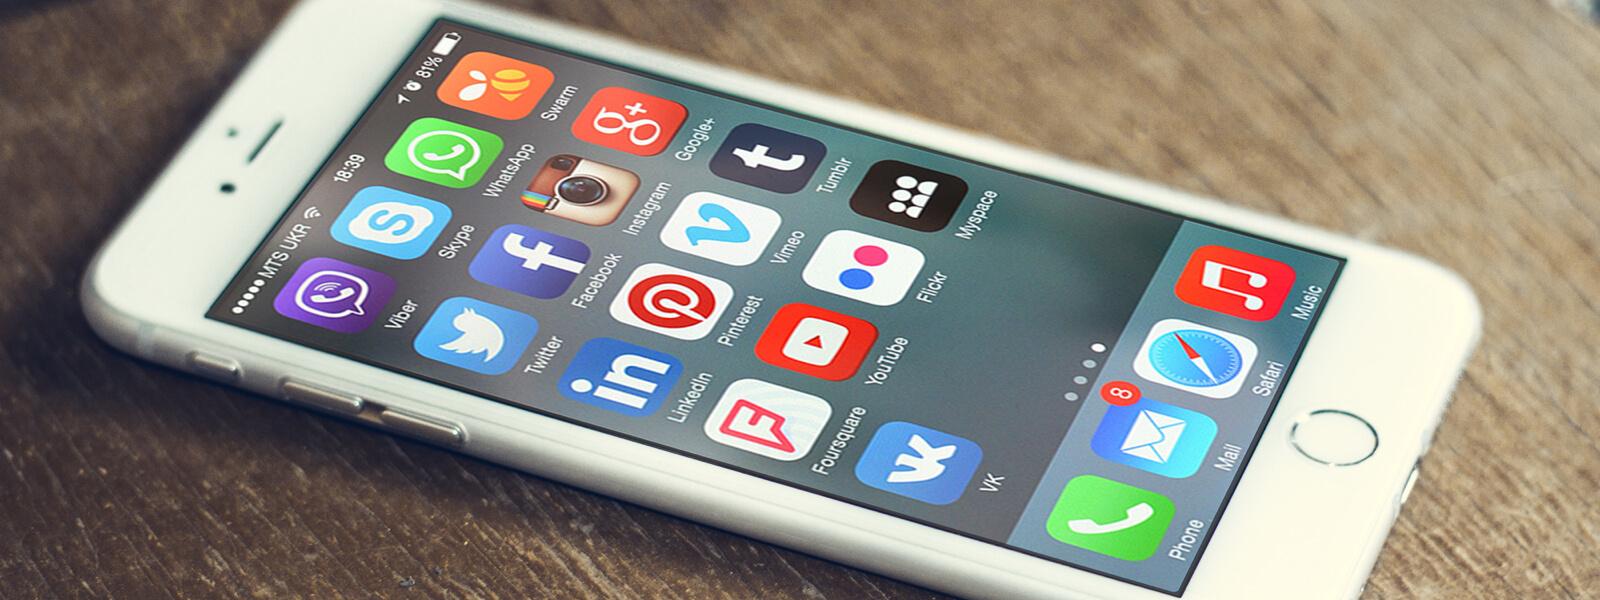 How to create a social media app from scratch - build your ...